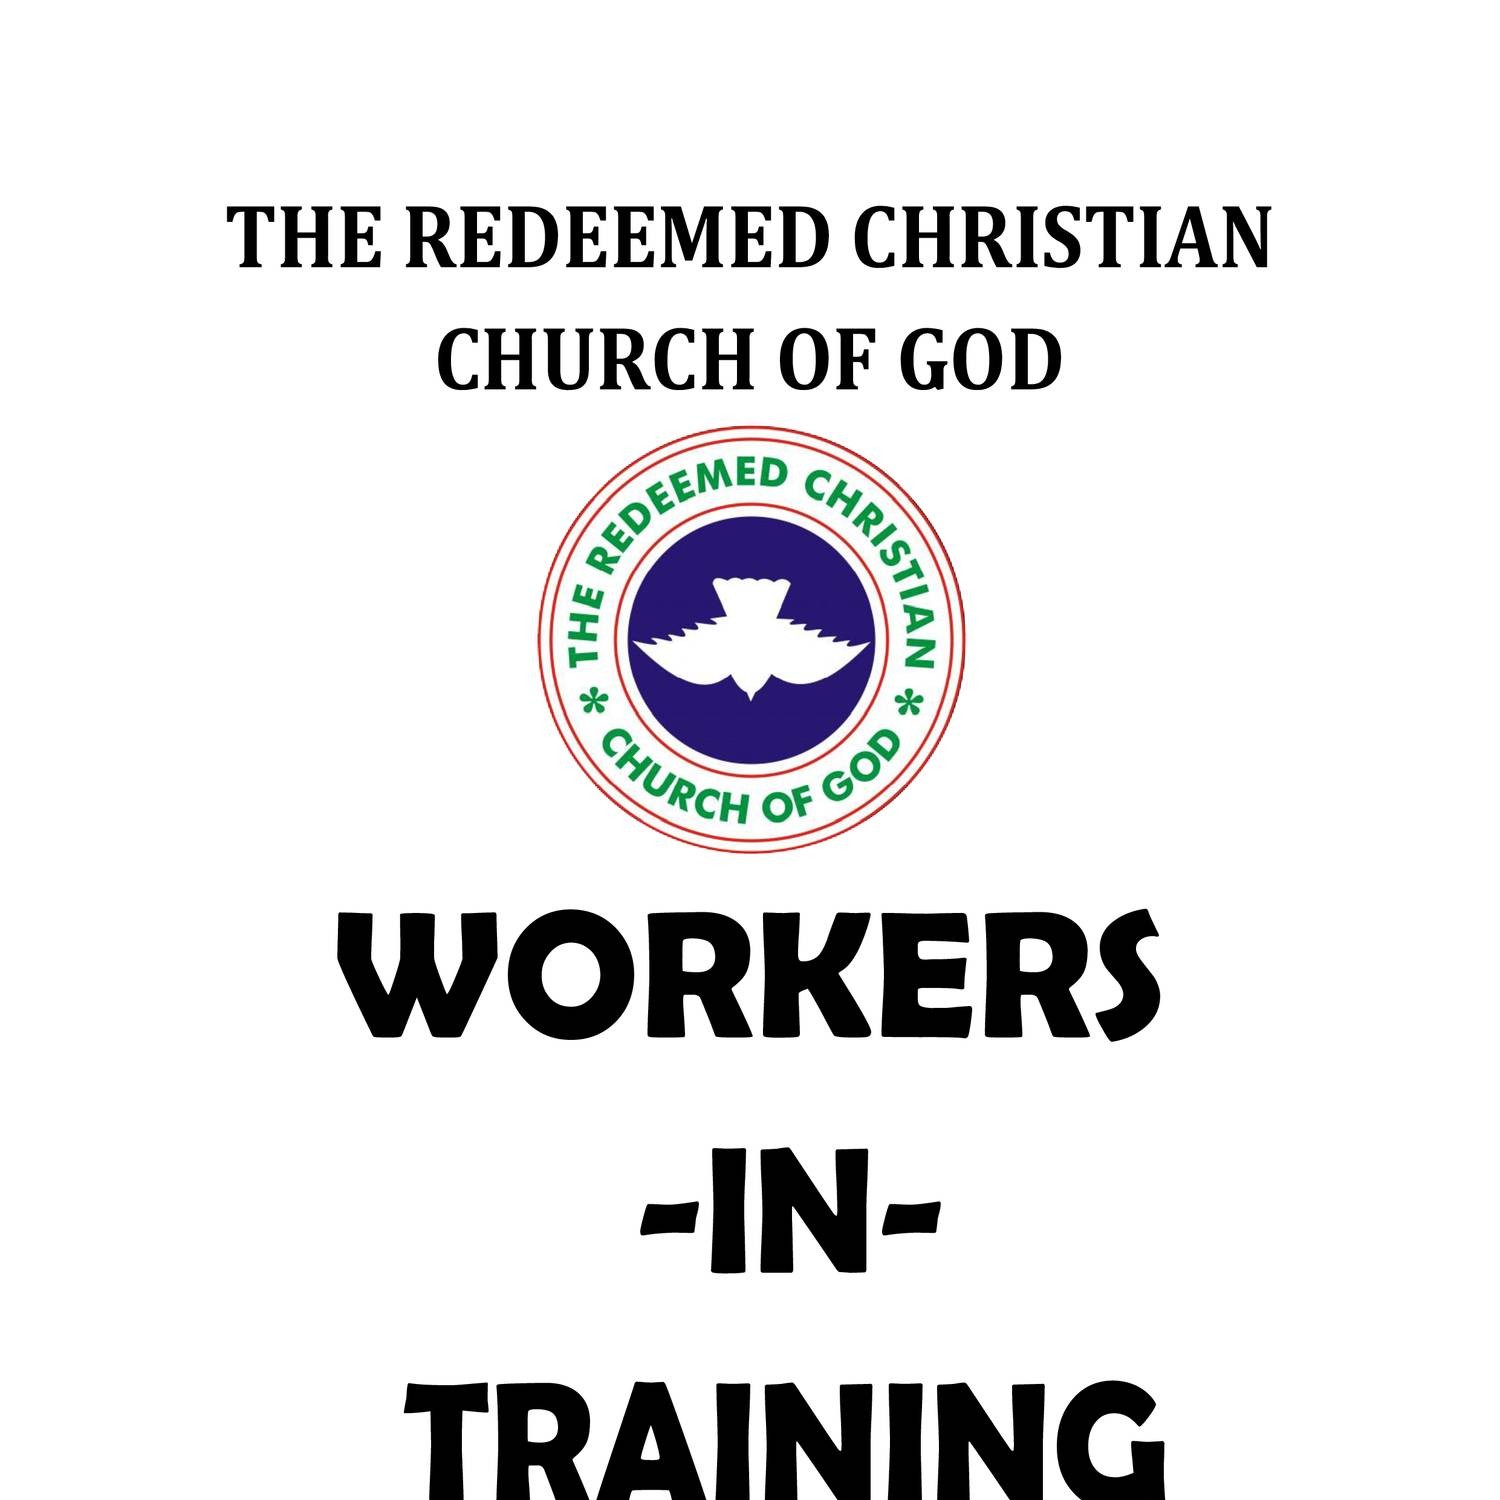 WORKERS-IN-TRAINING.pdf | DocDroid